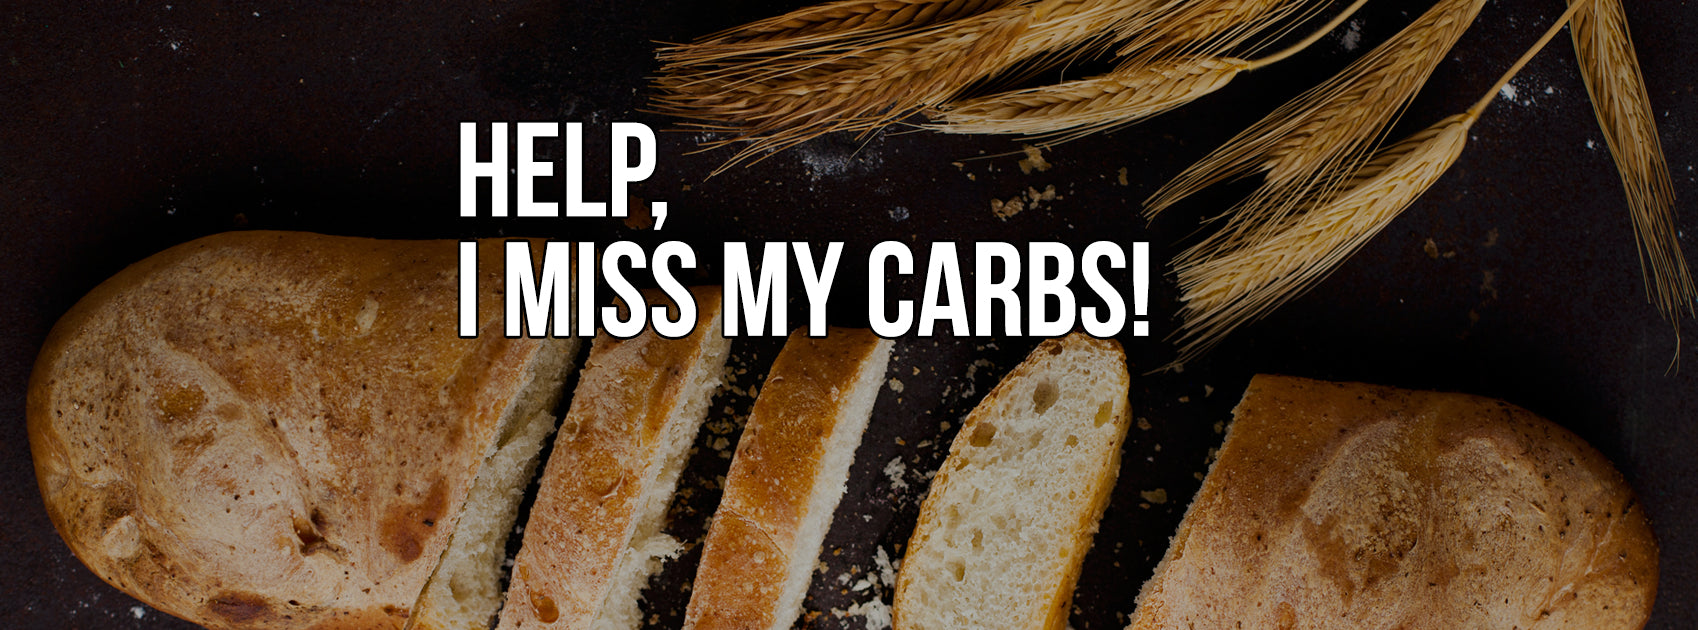 I Miss My Carbohydrates! - We Can Help You